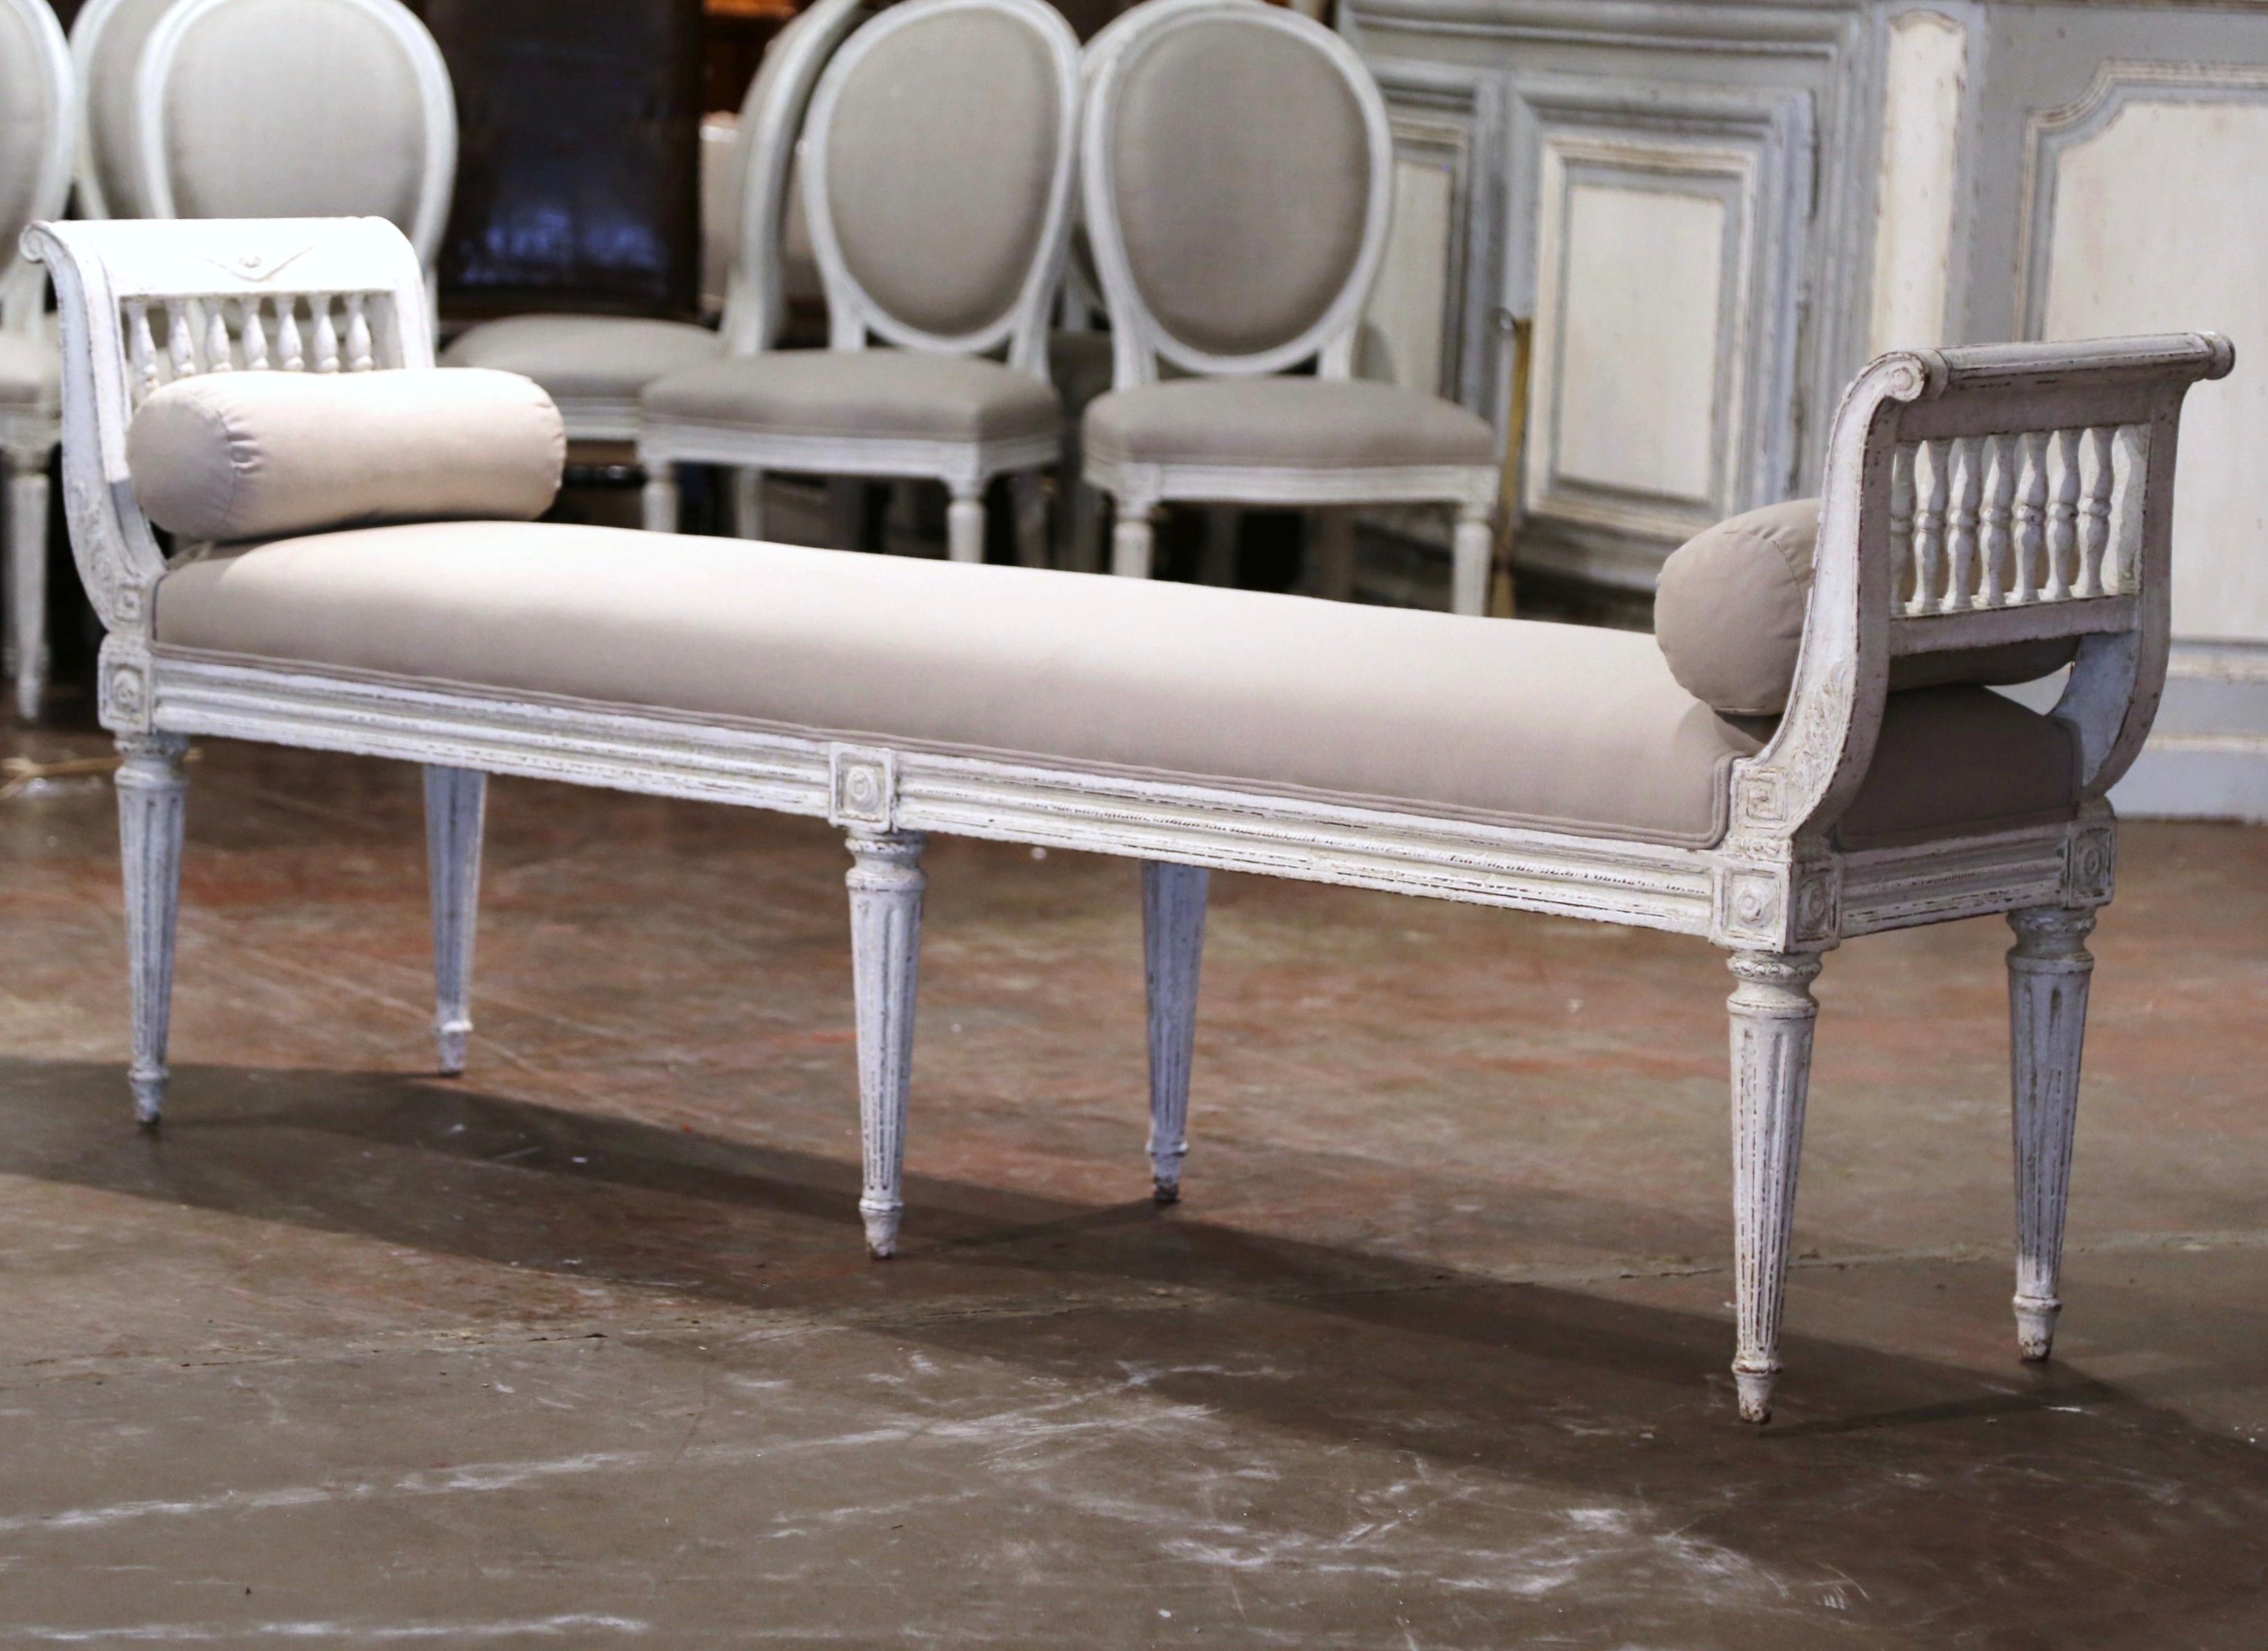 Place this elegant antique bench at the foot of a king size bed or in your living room for extra, versatile seating. Crafted in France, circa 1880, the traditional banquette stands on six tapered and fluted legs embellished with carved acanthus